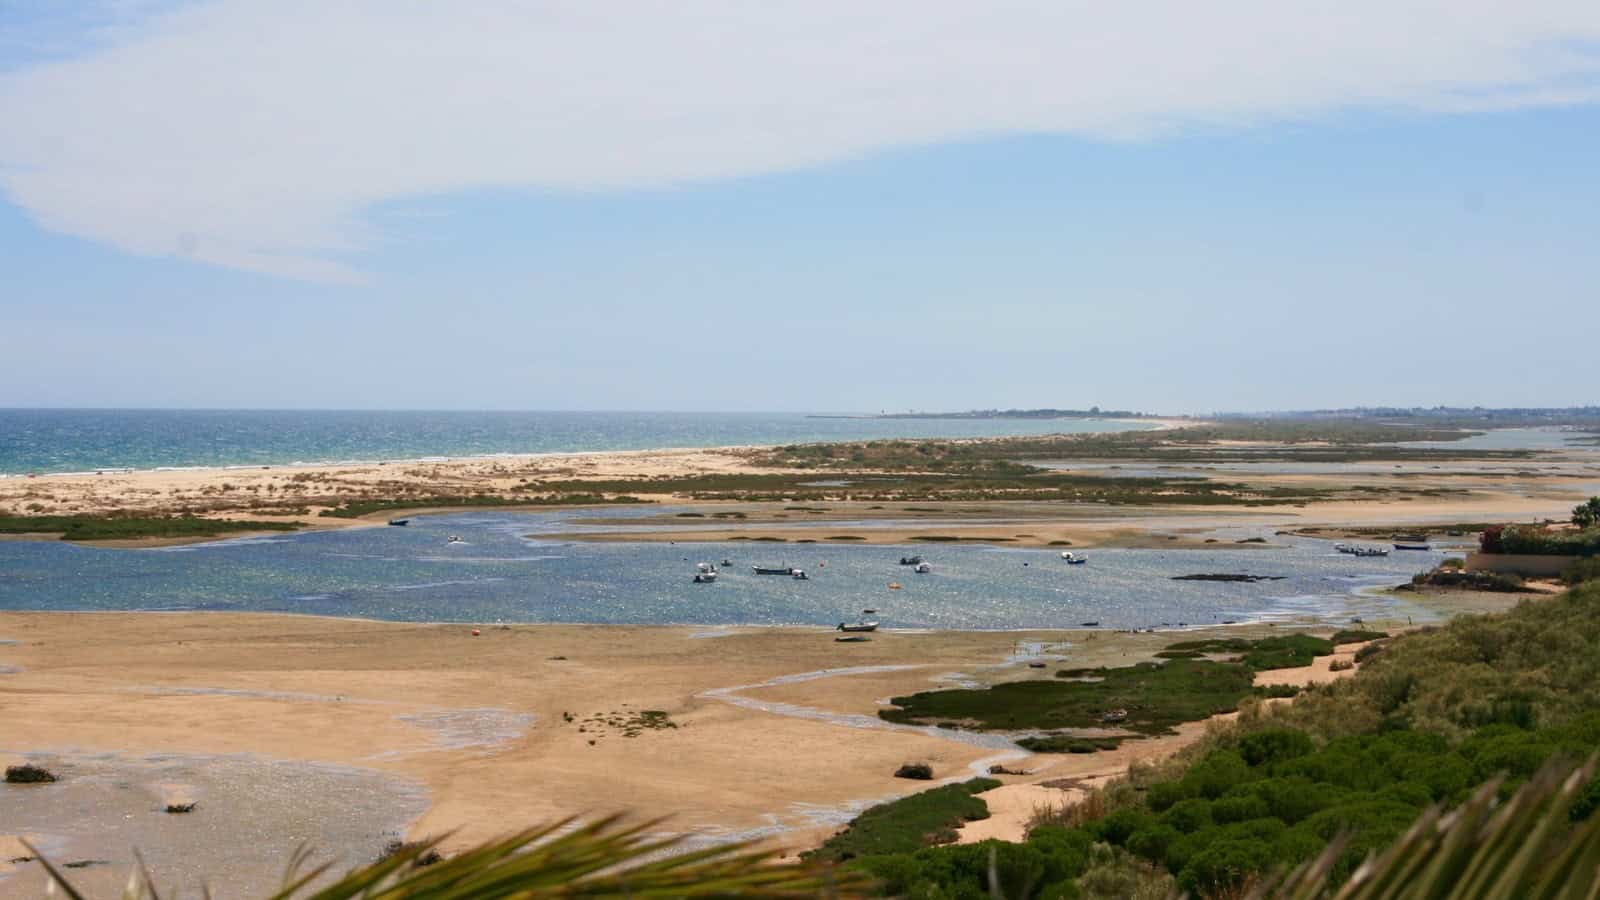 Cycling by the Algarve's seculded beaches and quaint villages